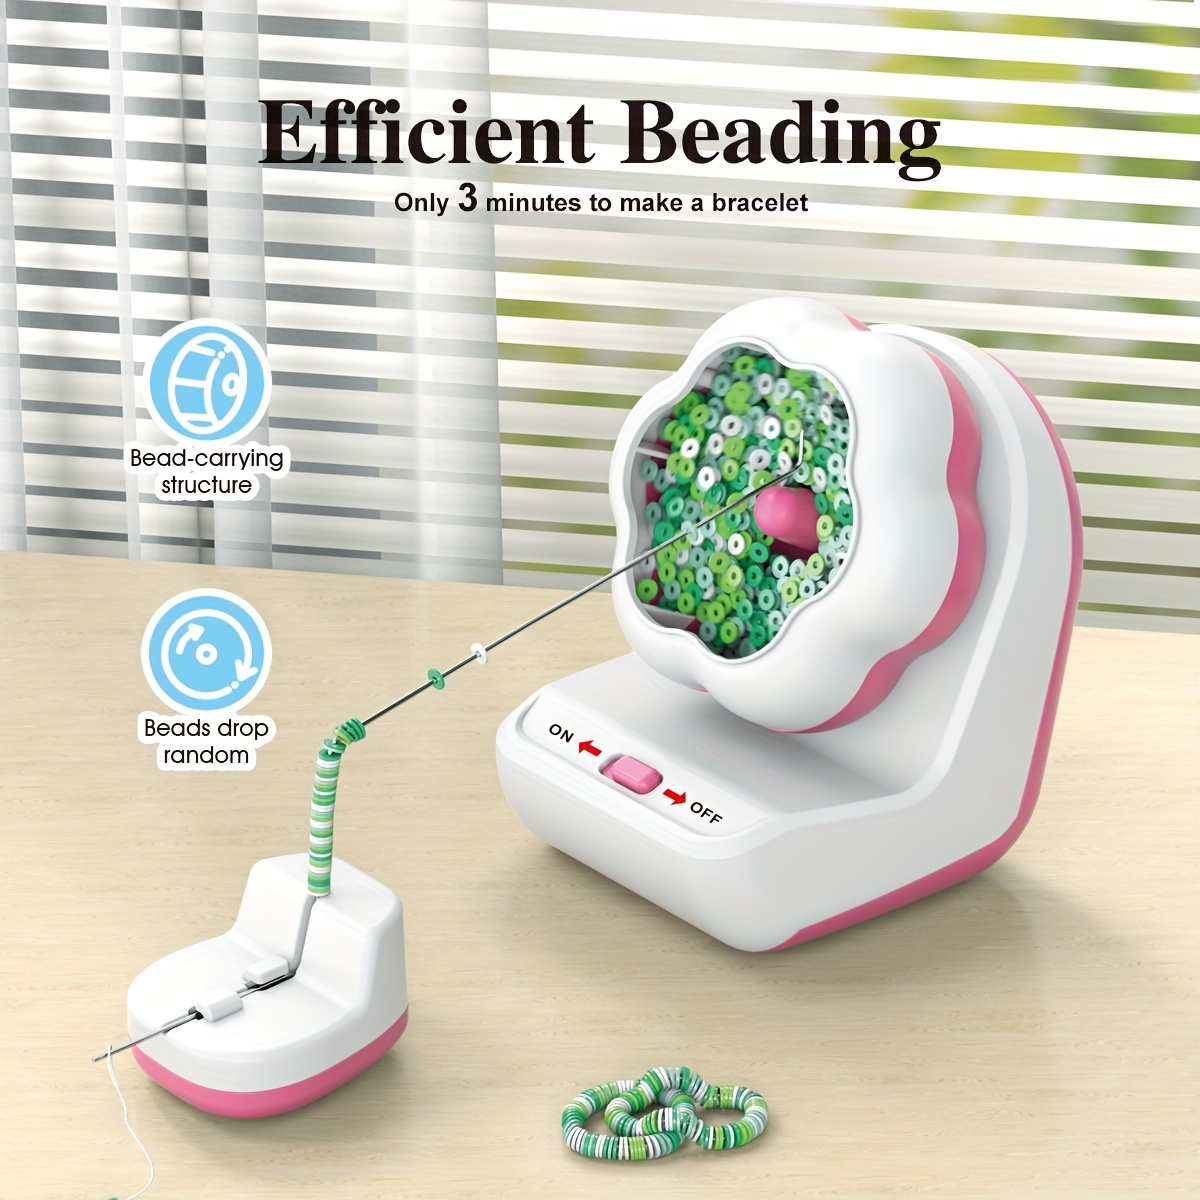 

Easy-use Electric Beading Machine With Precision Needle - Usb Powered, Ideal For Diy Jewelry Making, Bracelets & Necklaces